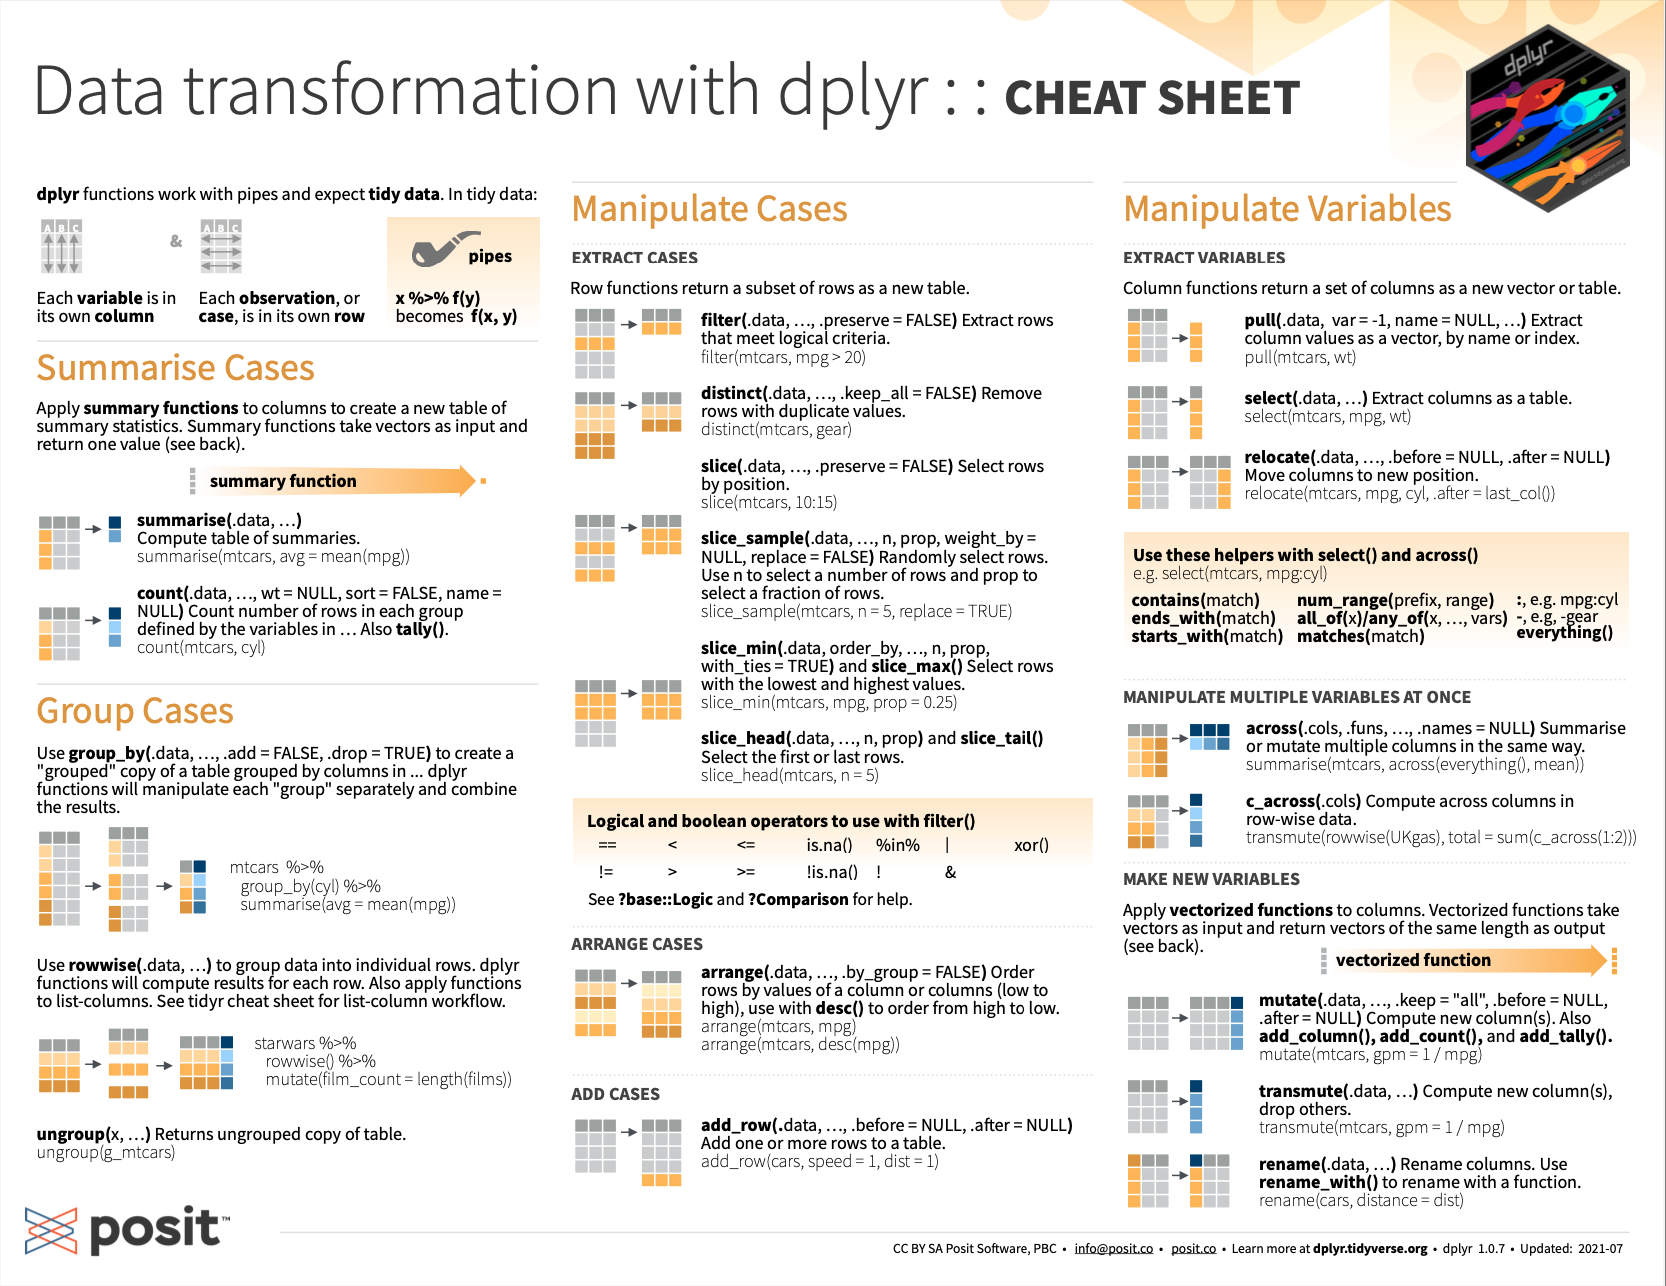 Data transformation with dplyr from Posit cheatsheets.